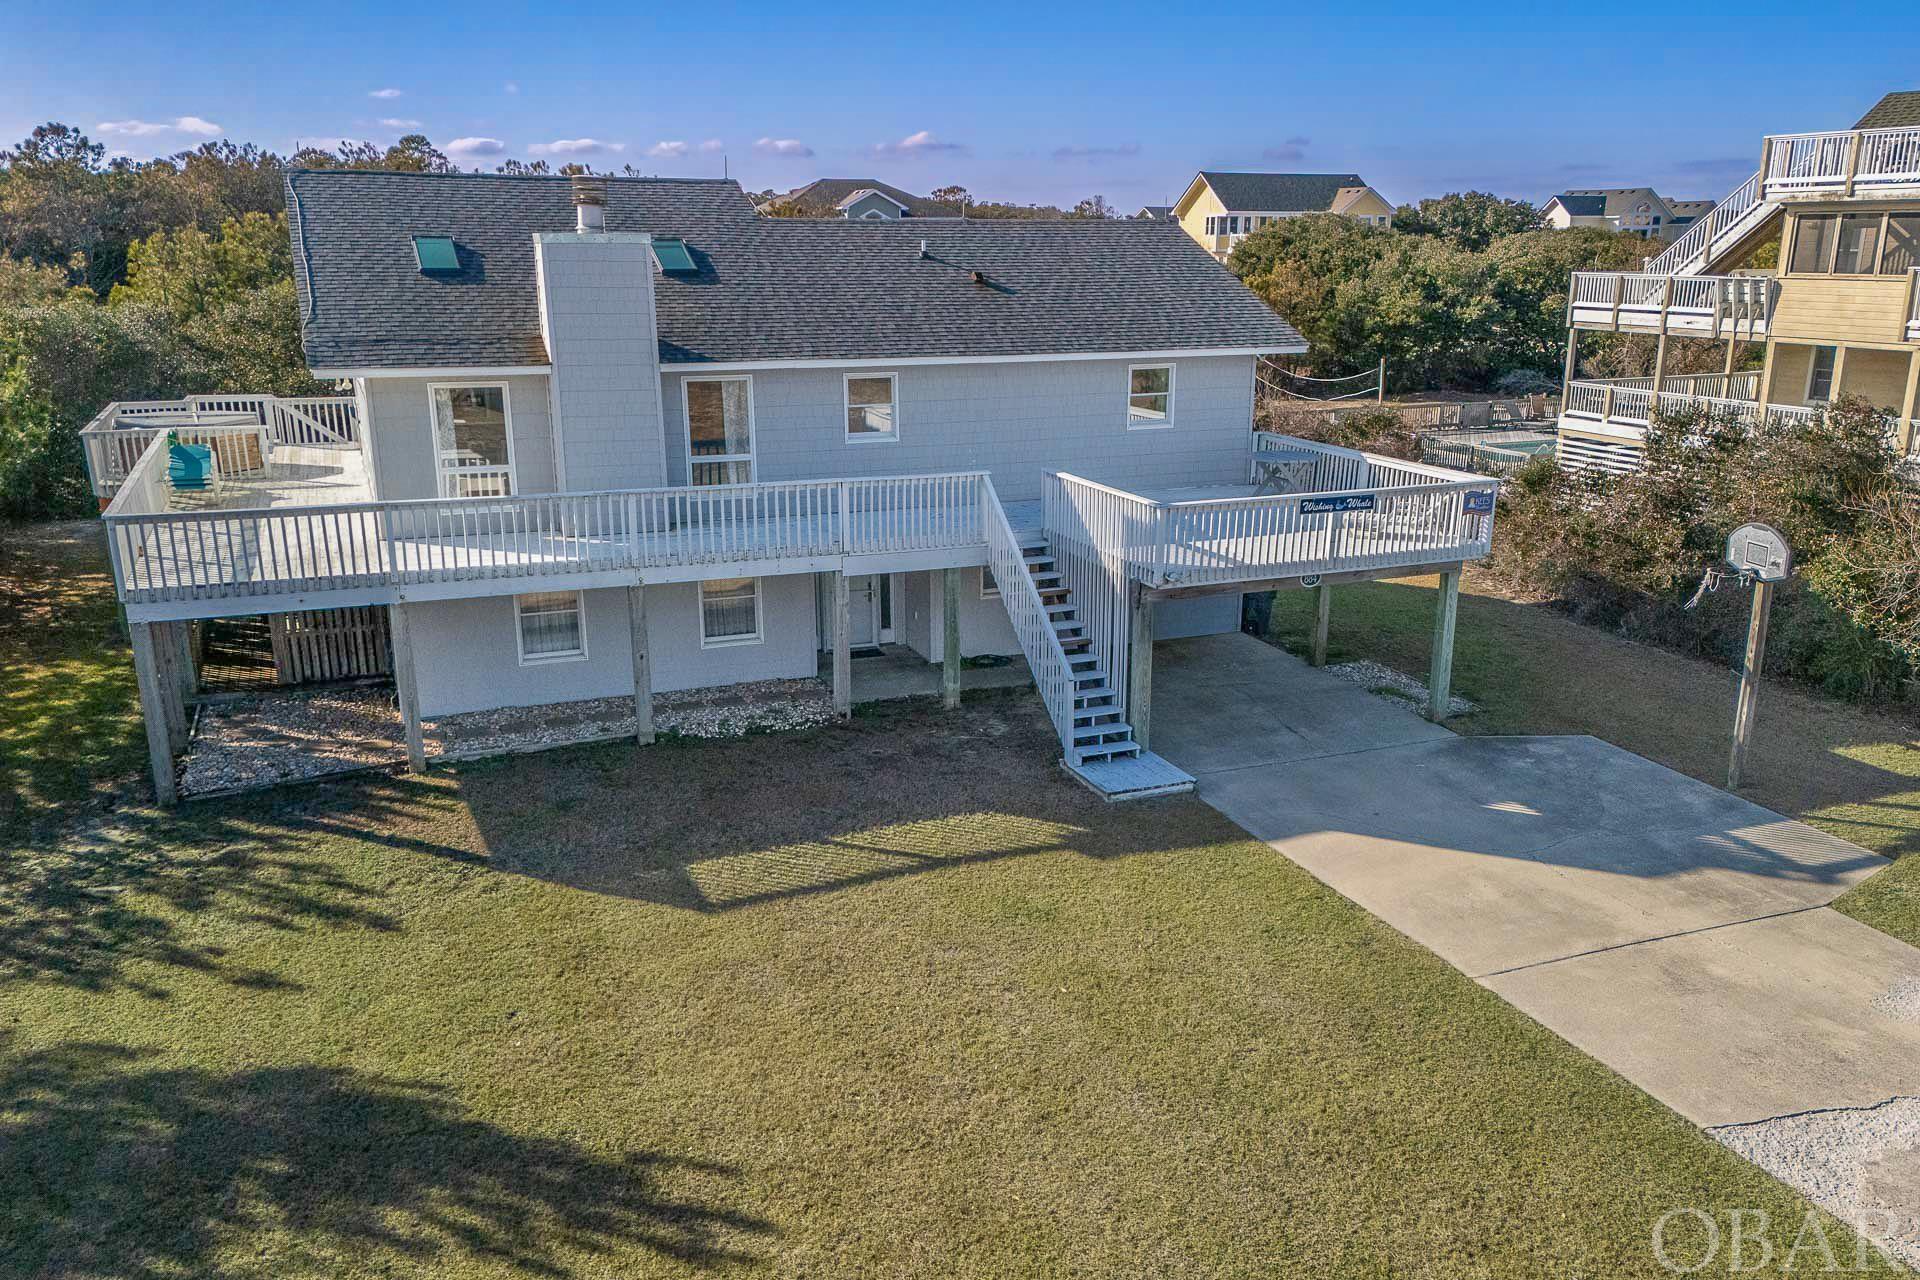 884 Whalehead Drive, Corolla, NC 27927, 4 Bedrooms Bedrooms, ,4 BathroomsBathrooms,Residential,For sale,Whalehead Drive,124312